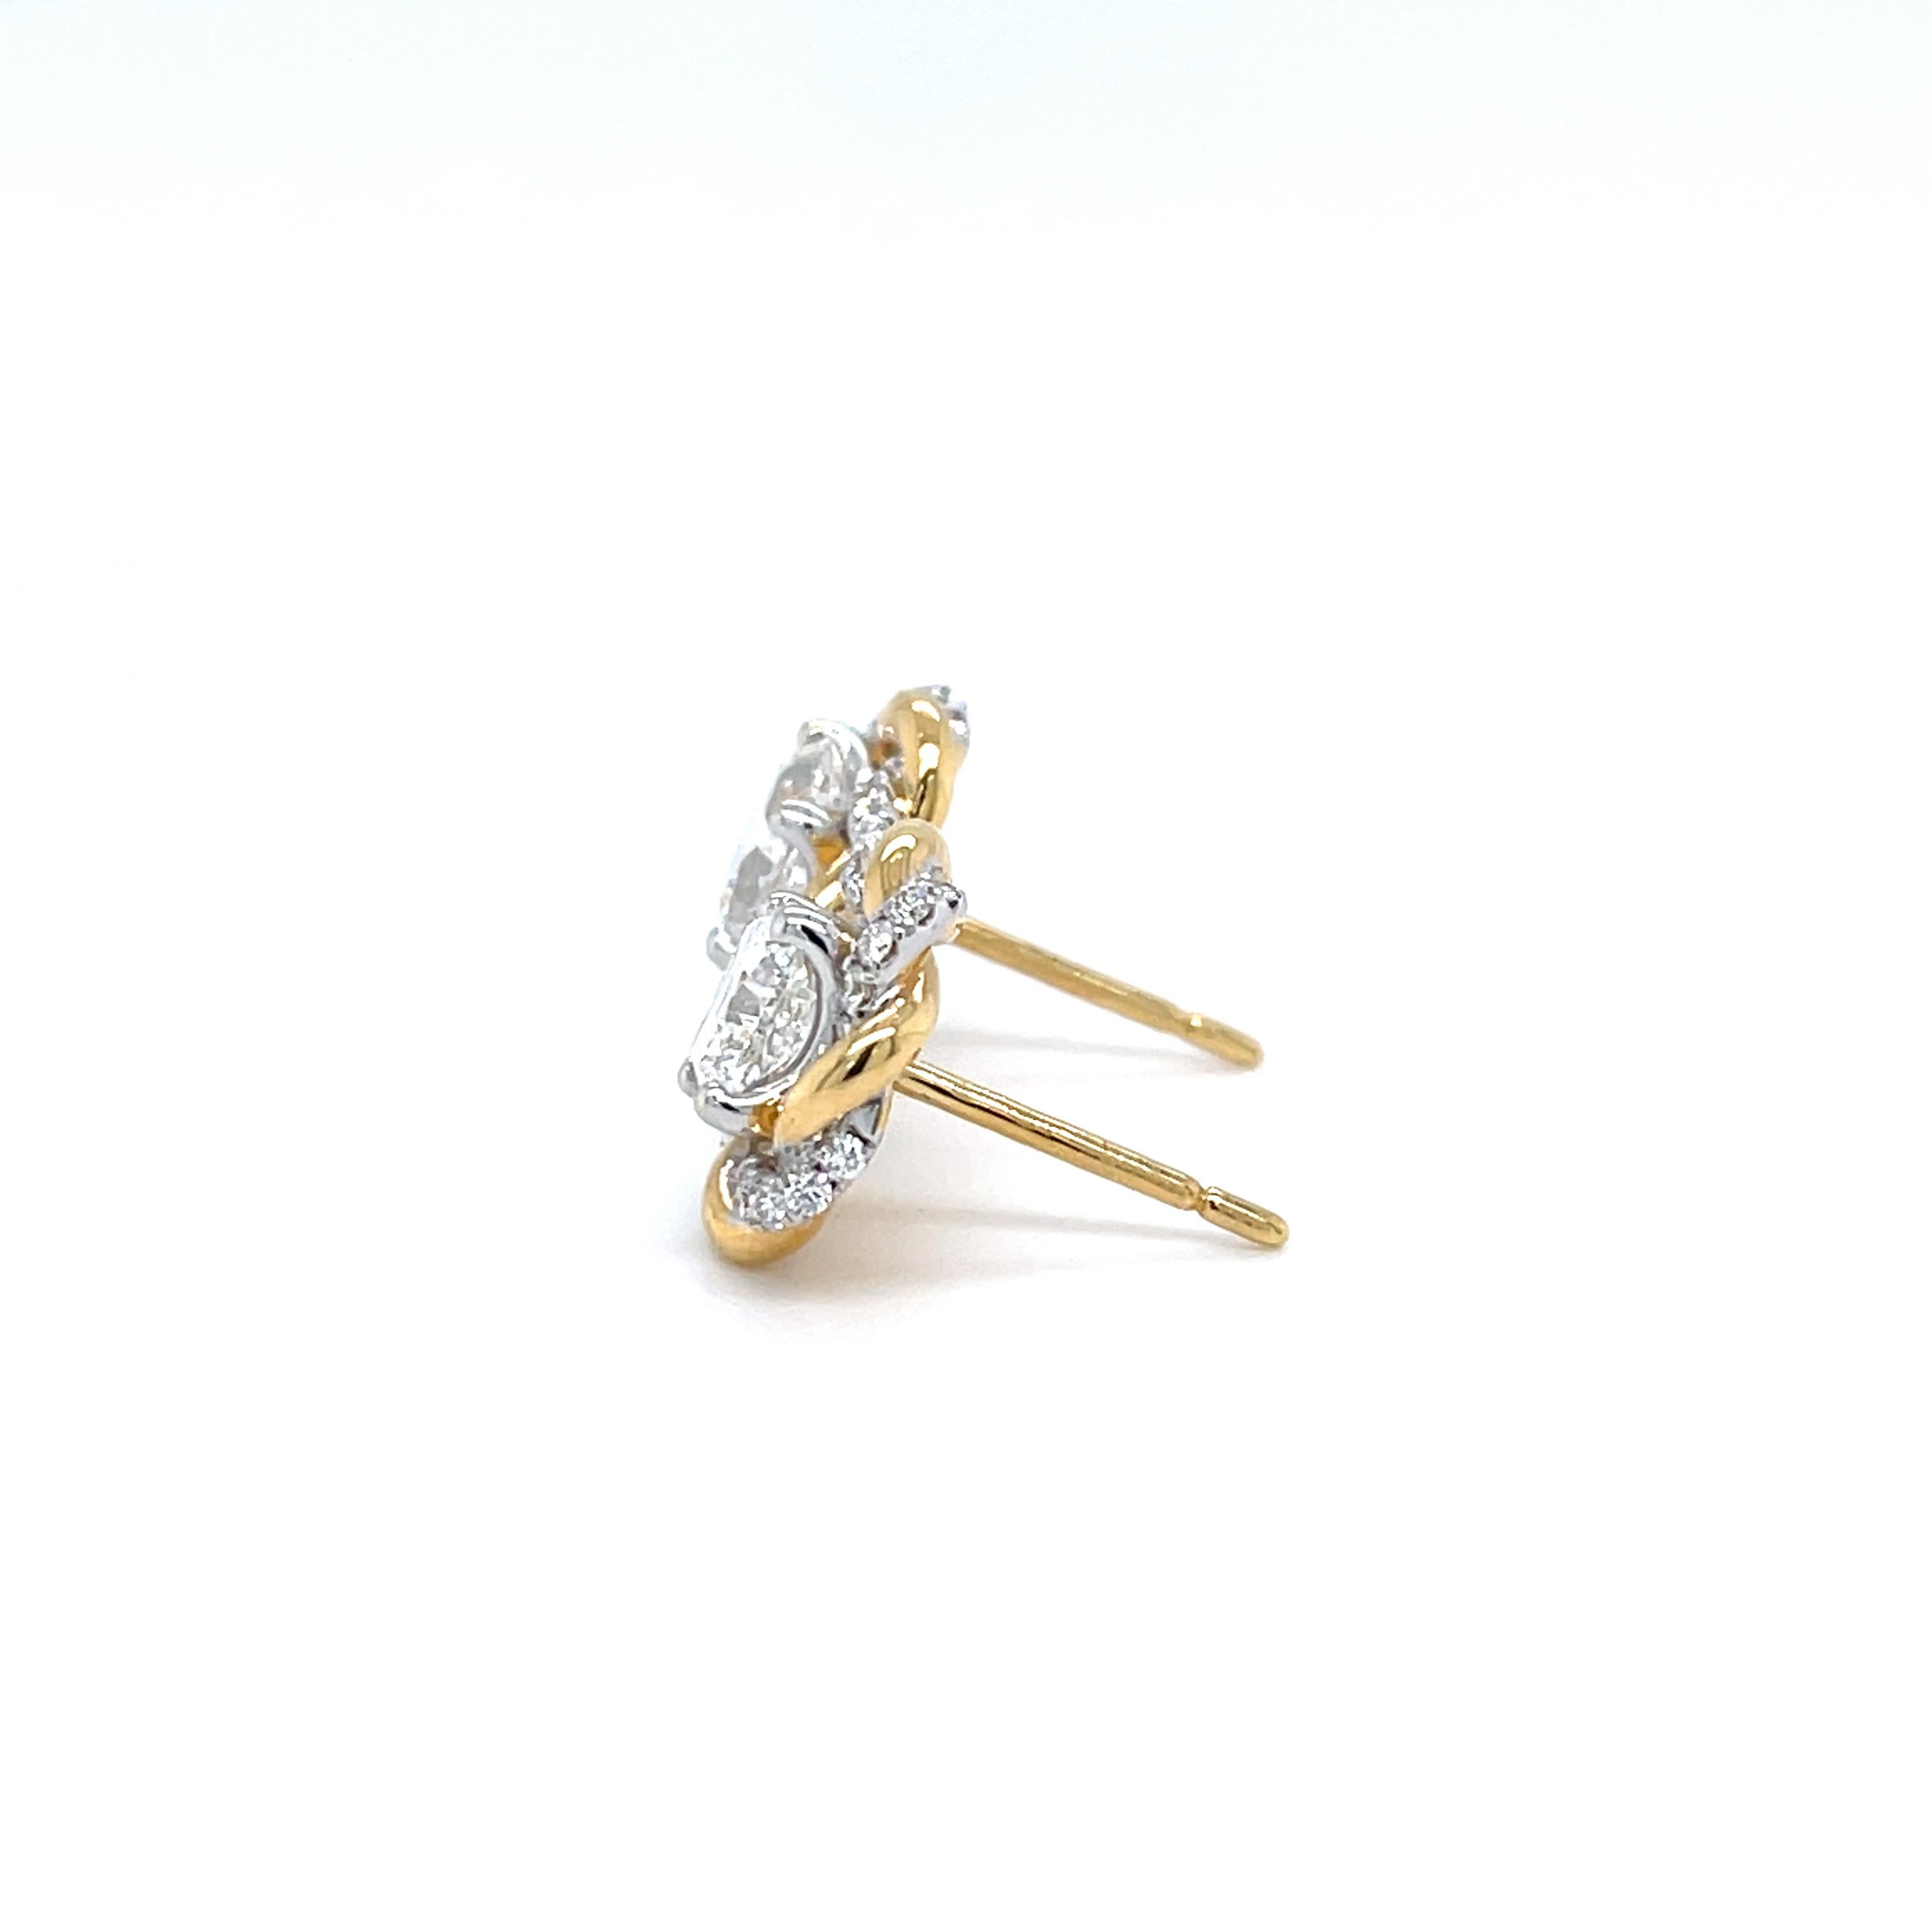 Sparkling Squared: 2.02 Carat Radiant Diamond Earrings in 18K Yellow Gold (GIA Certified)

Embrace contemporary elegance with this captivating pair of diamond stud earrings. Featuring two square radiant cut diamonds boasting a combined weight of